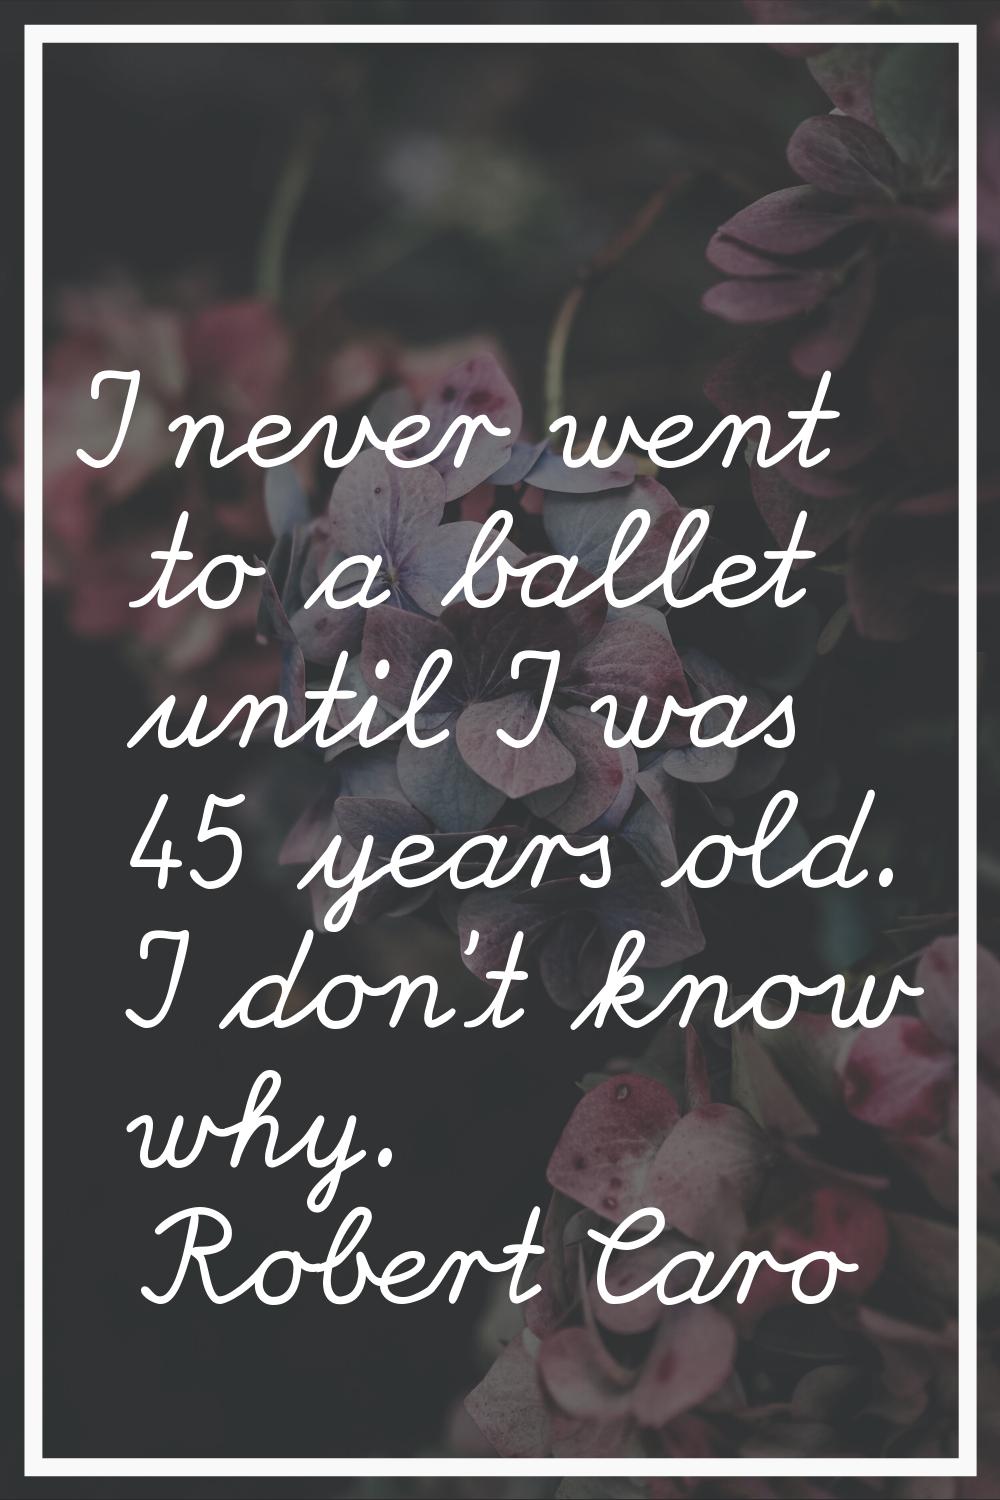 I never went to a ballet until I was 45 years old. I don't know why.